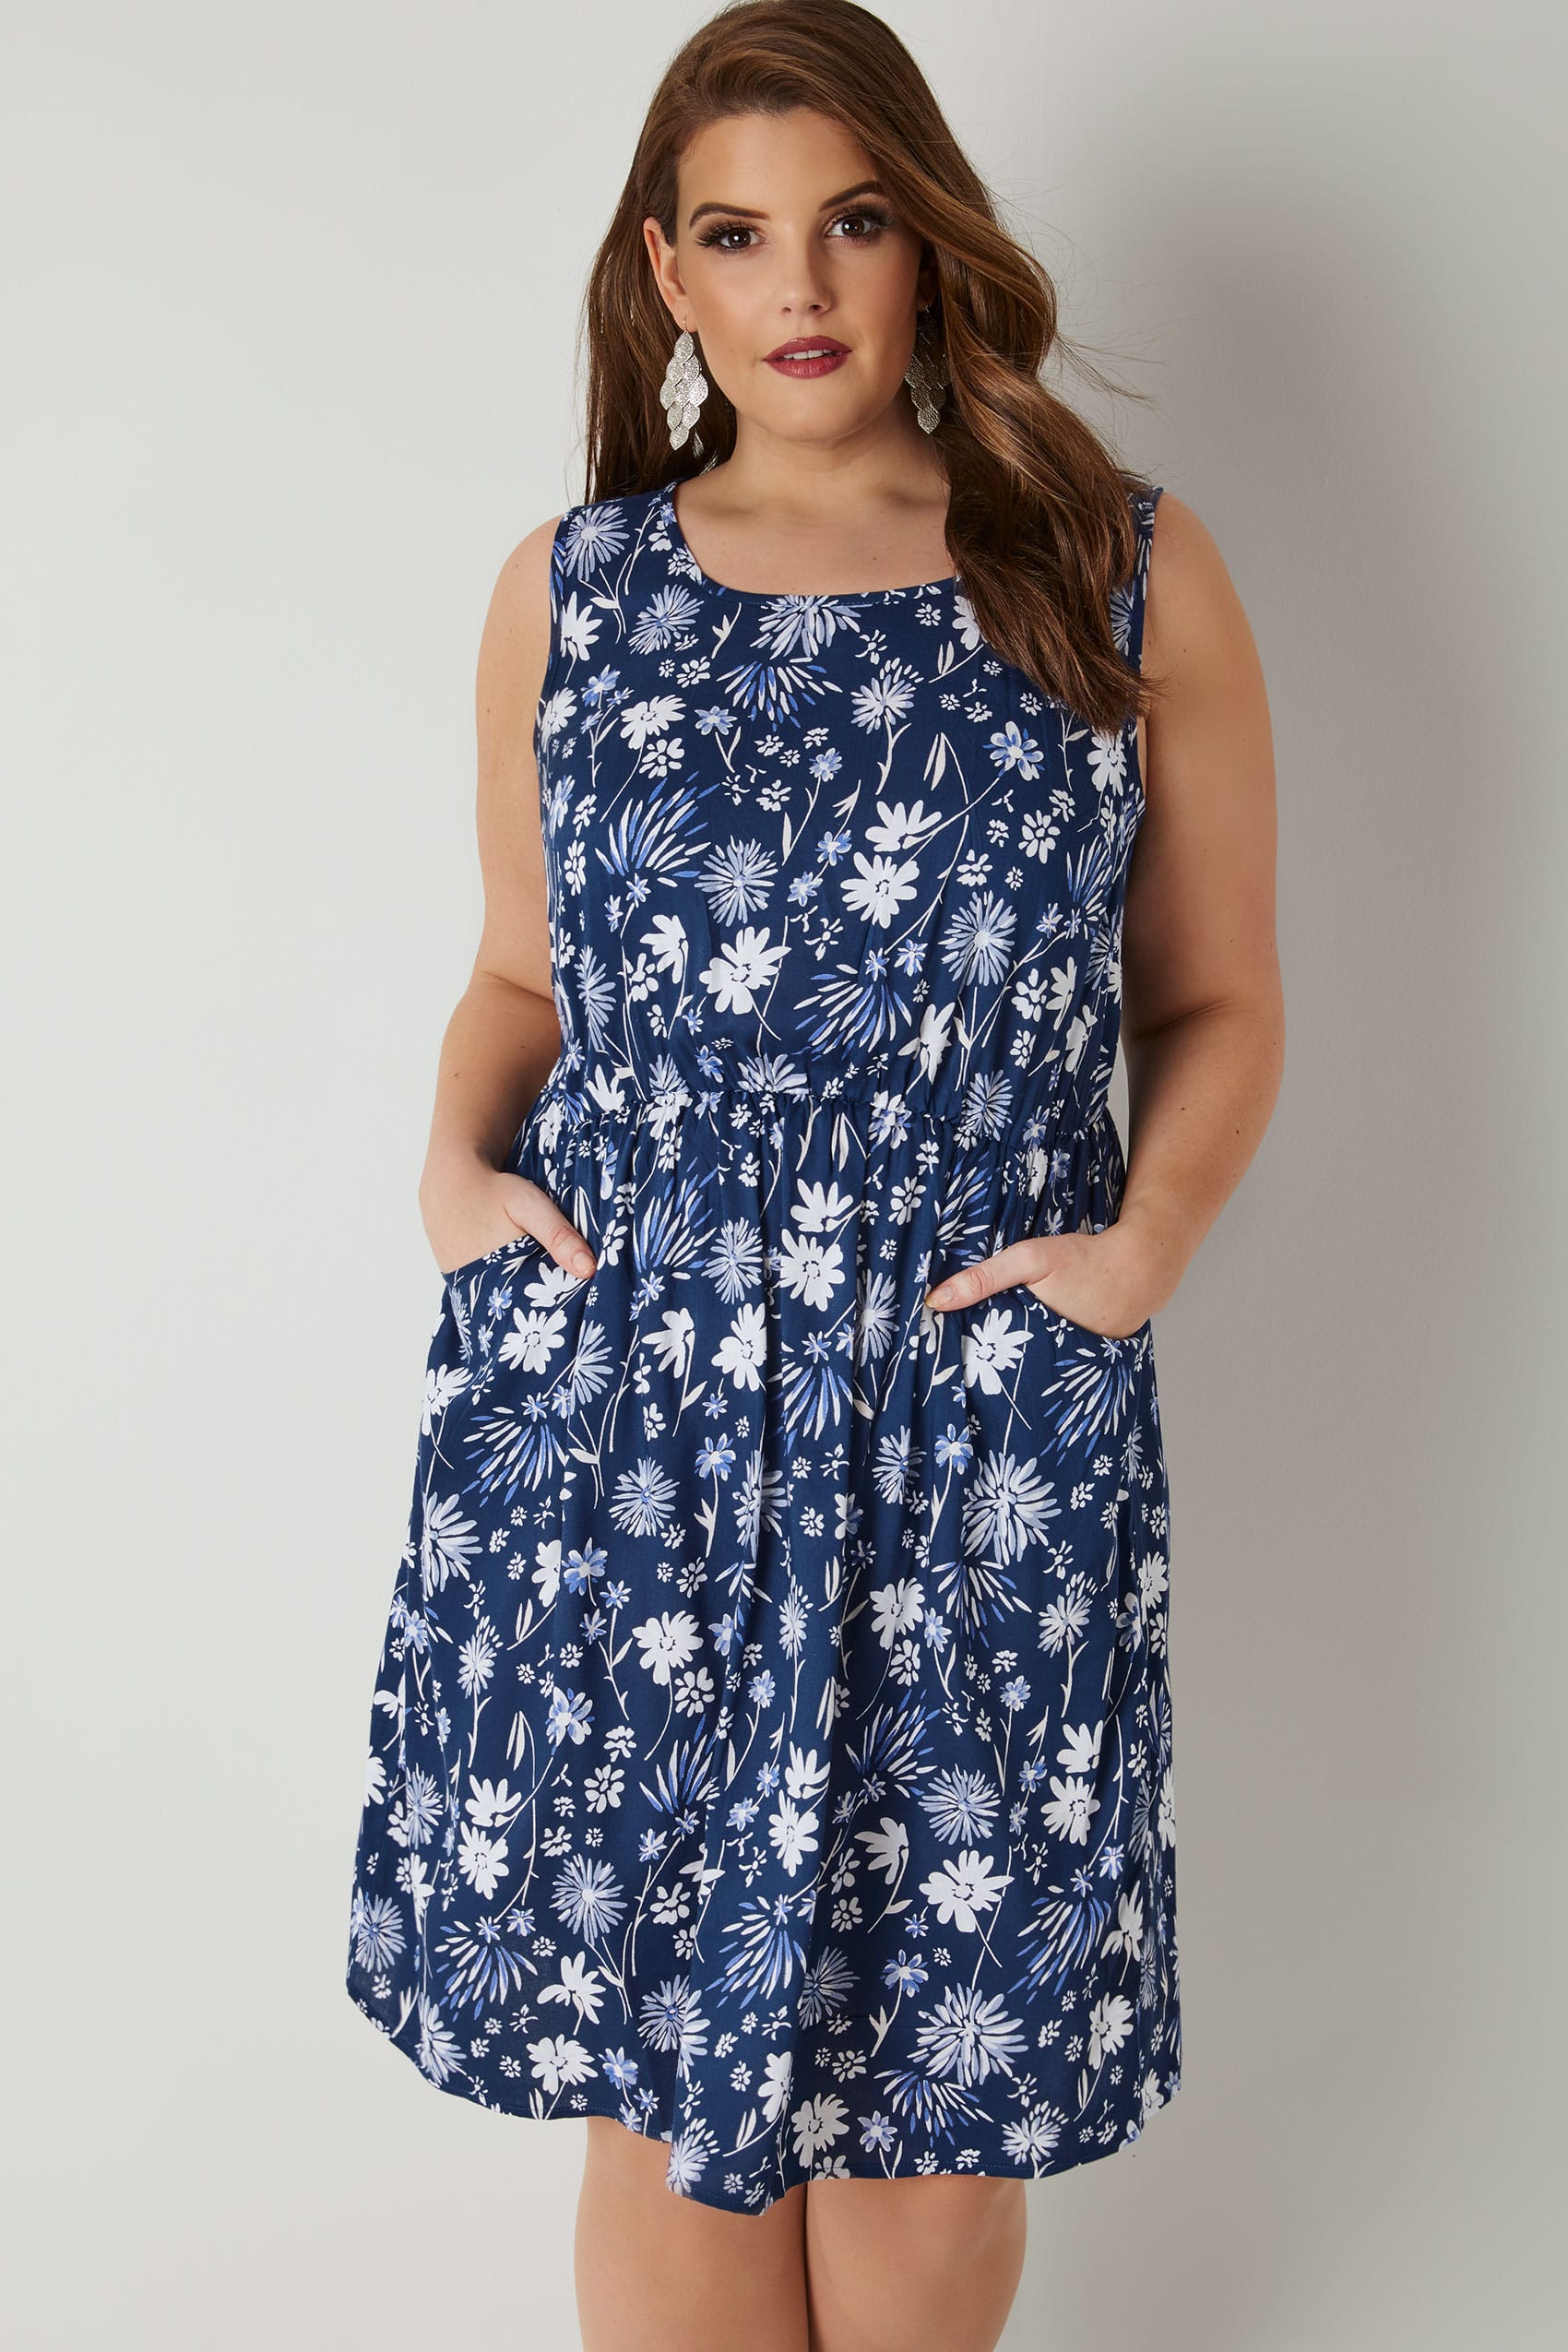 Blue & White Floral Print Pocket Dress With Elasticated Waistband, plus